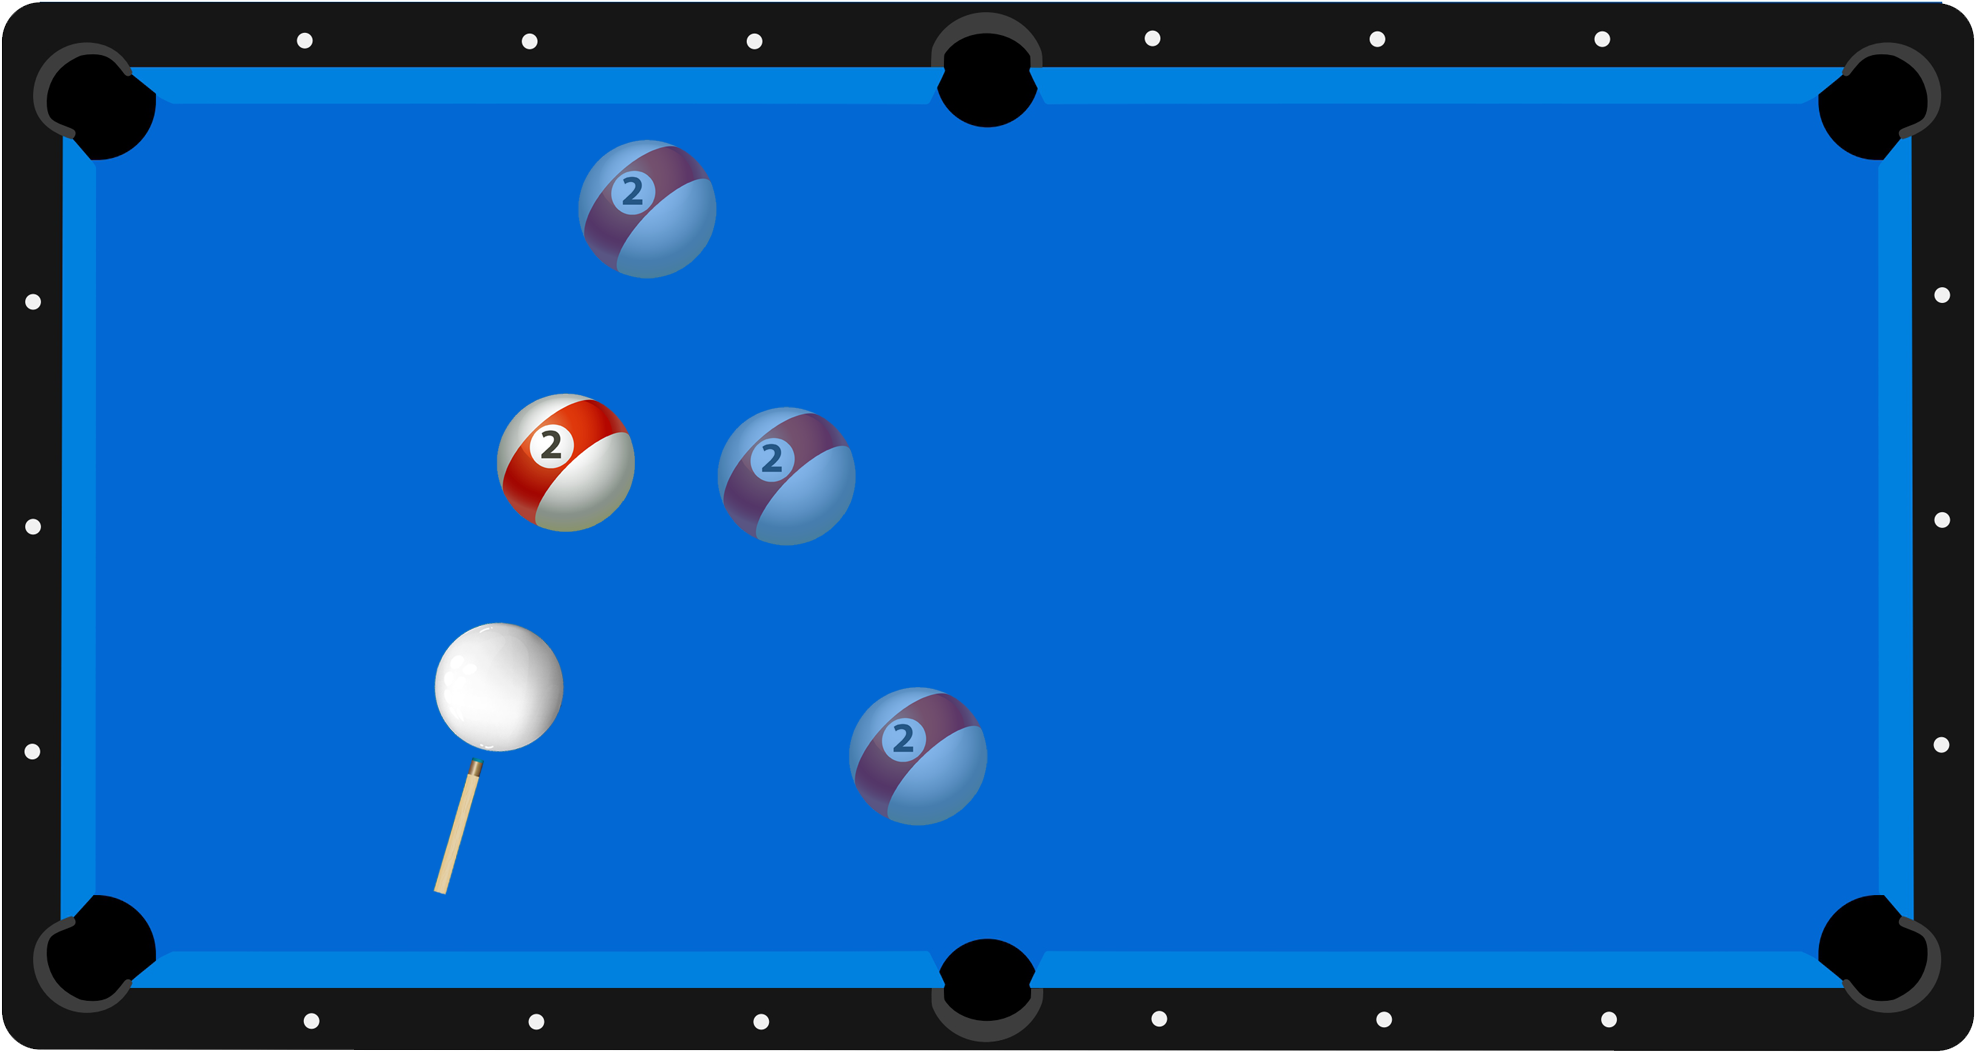 How To Double Back - Straight Pool (2500x1405)